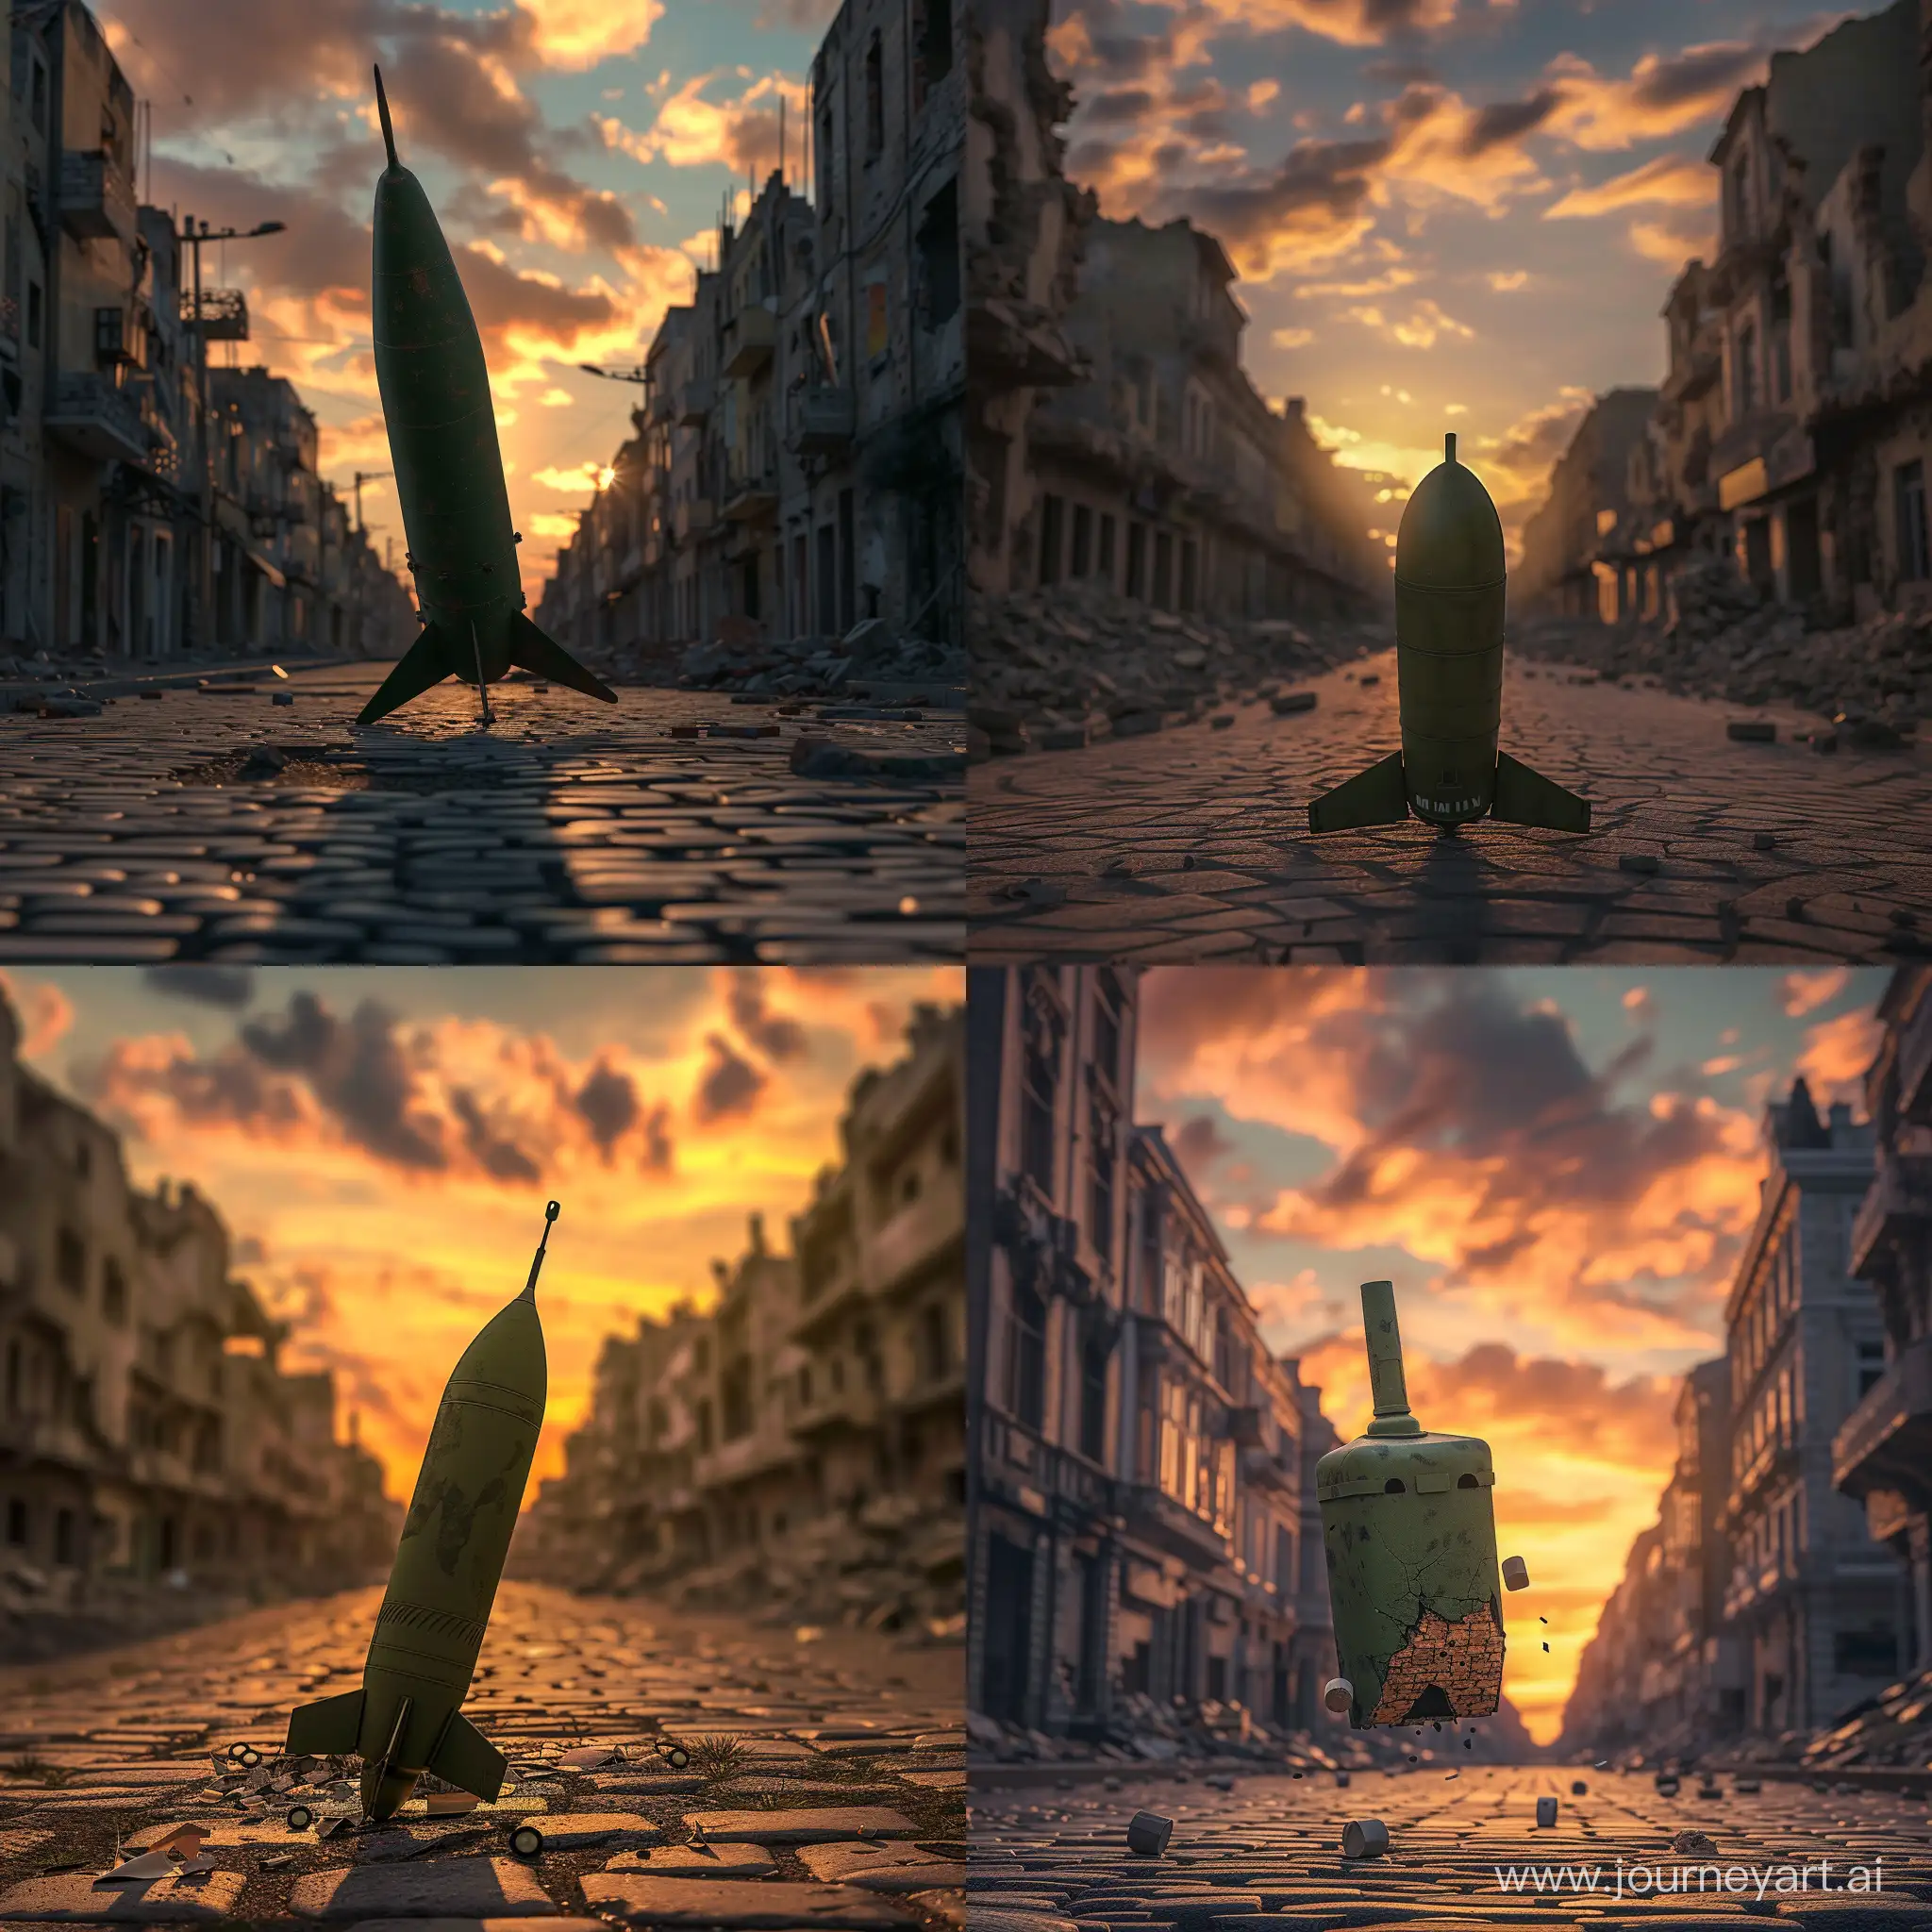 Unexploded-WWII-Bomb-Stands-Tall-in-Abandoned-Sunset-City